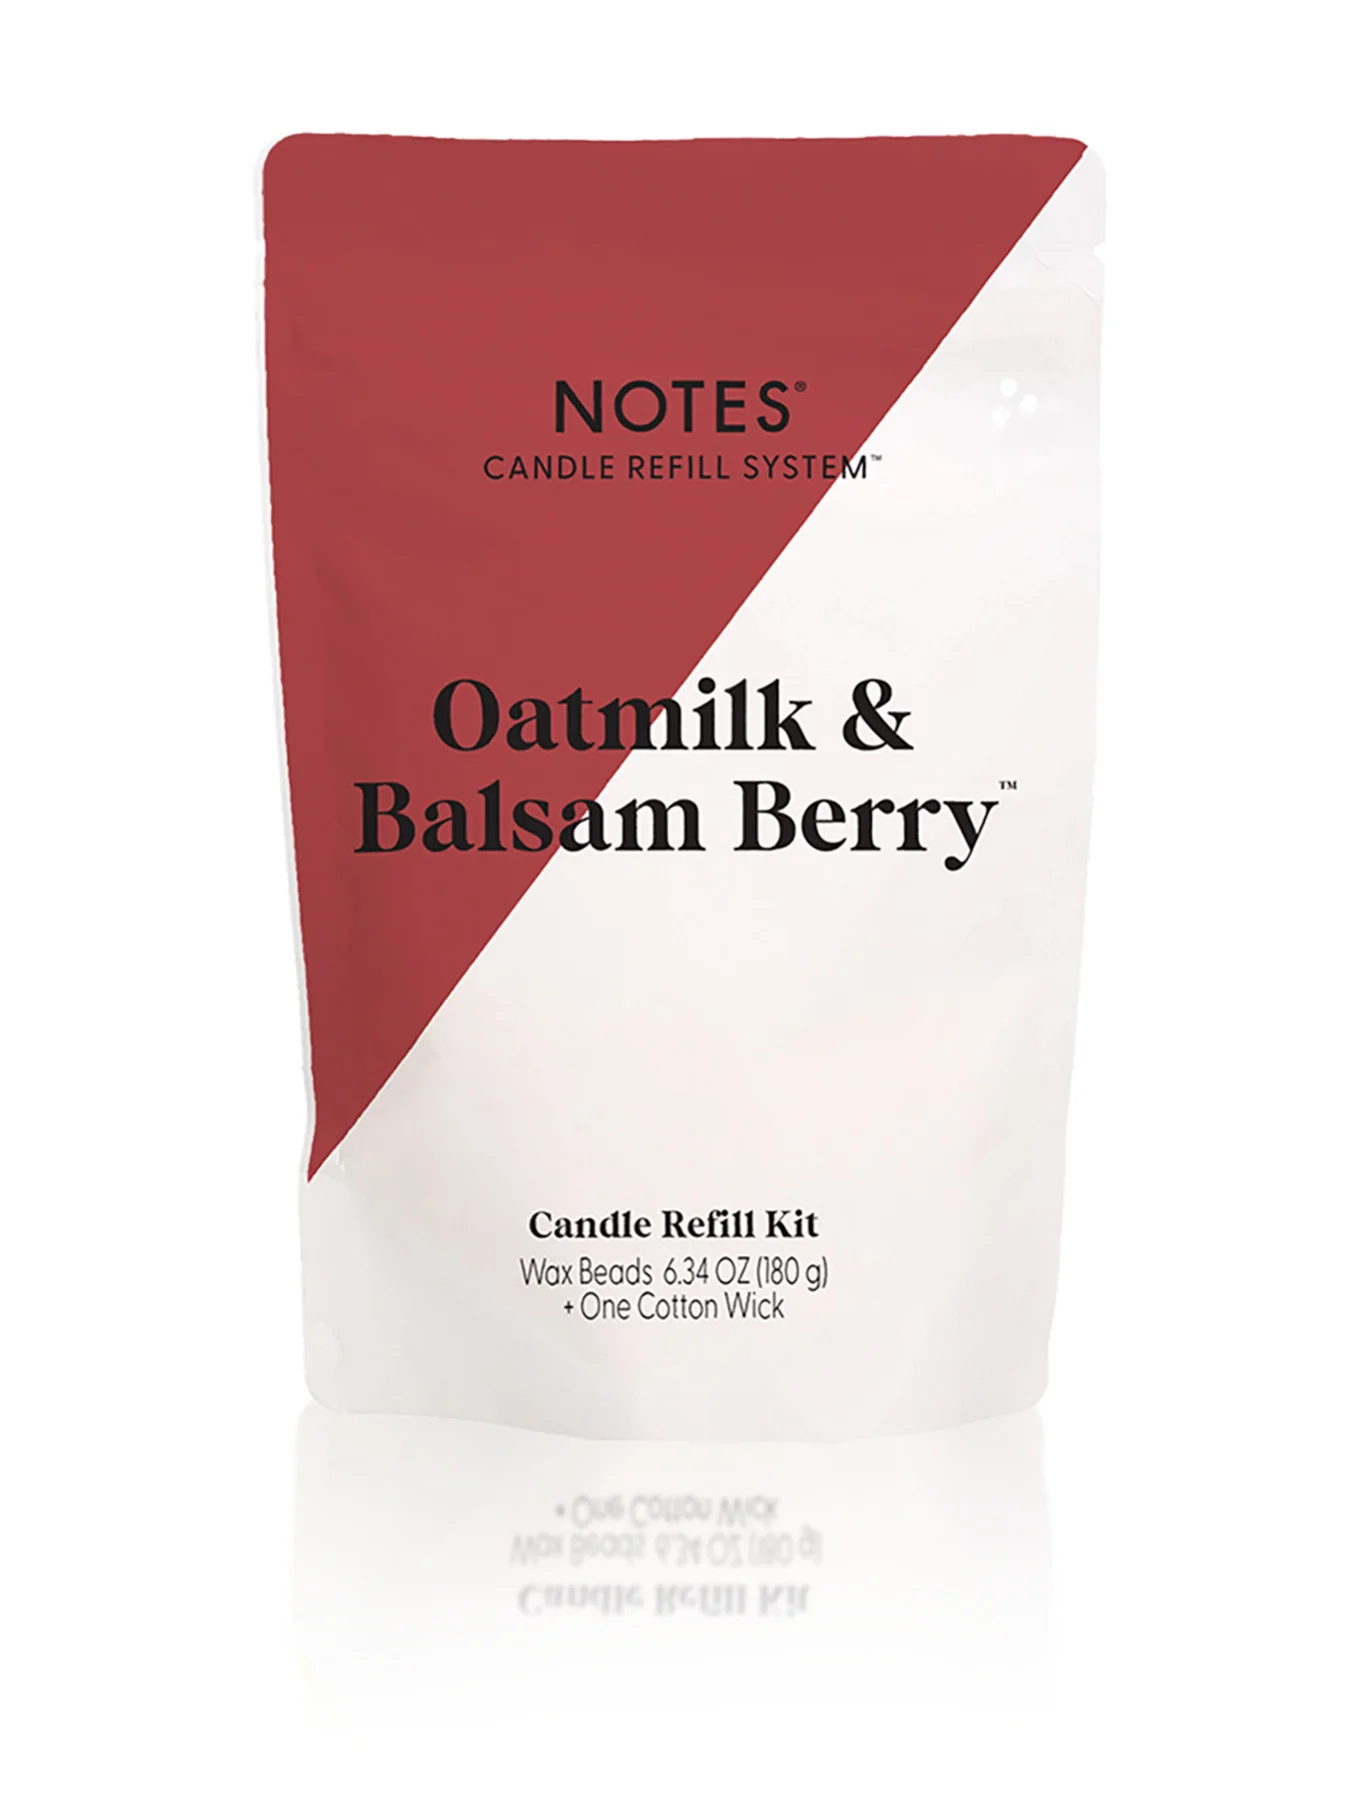 Oatmilk Berry Candle Refill Kit